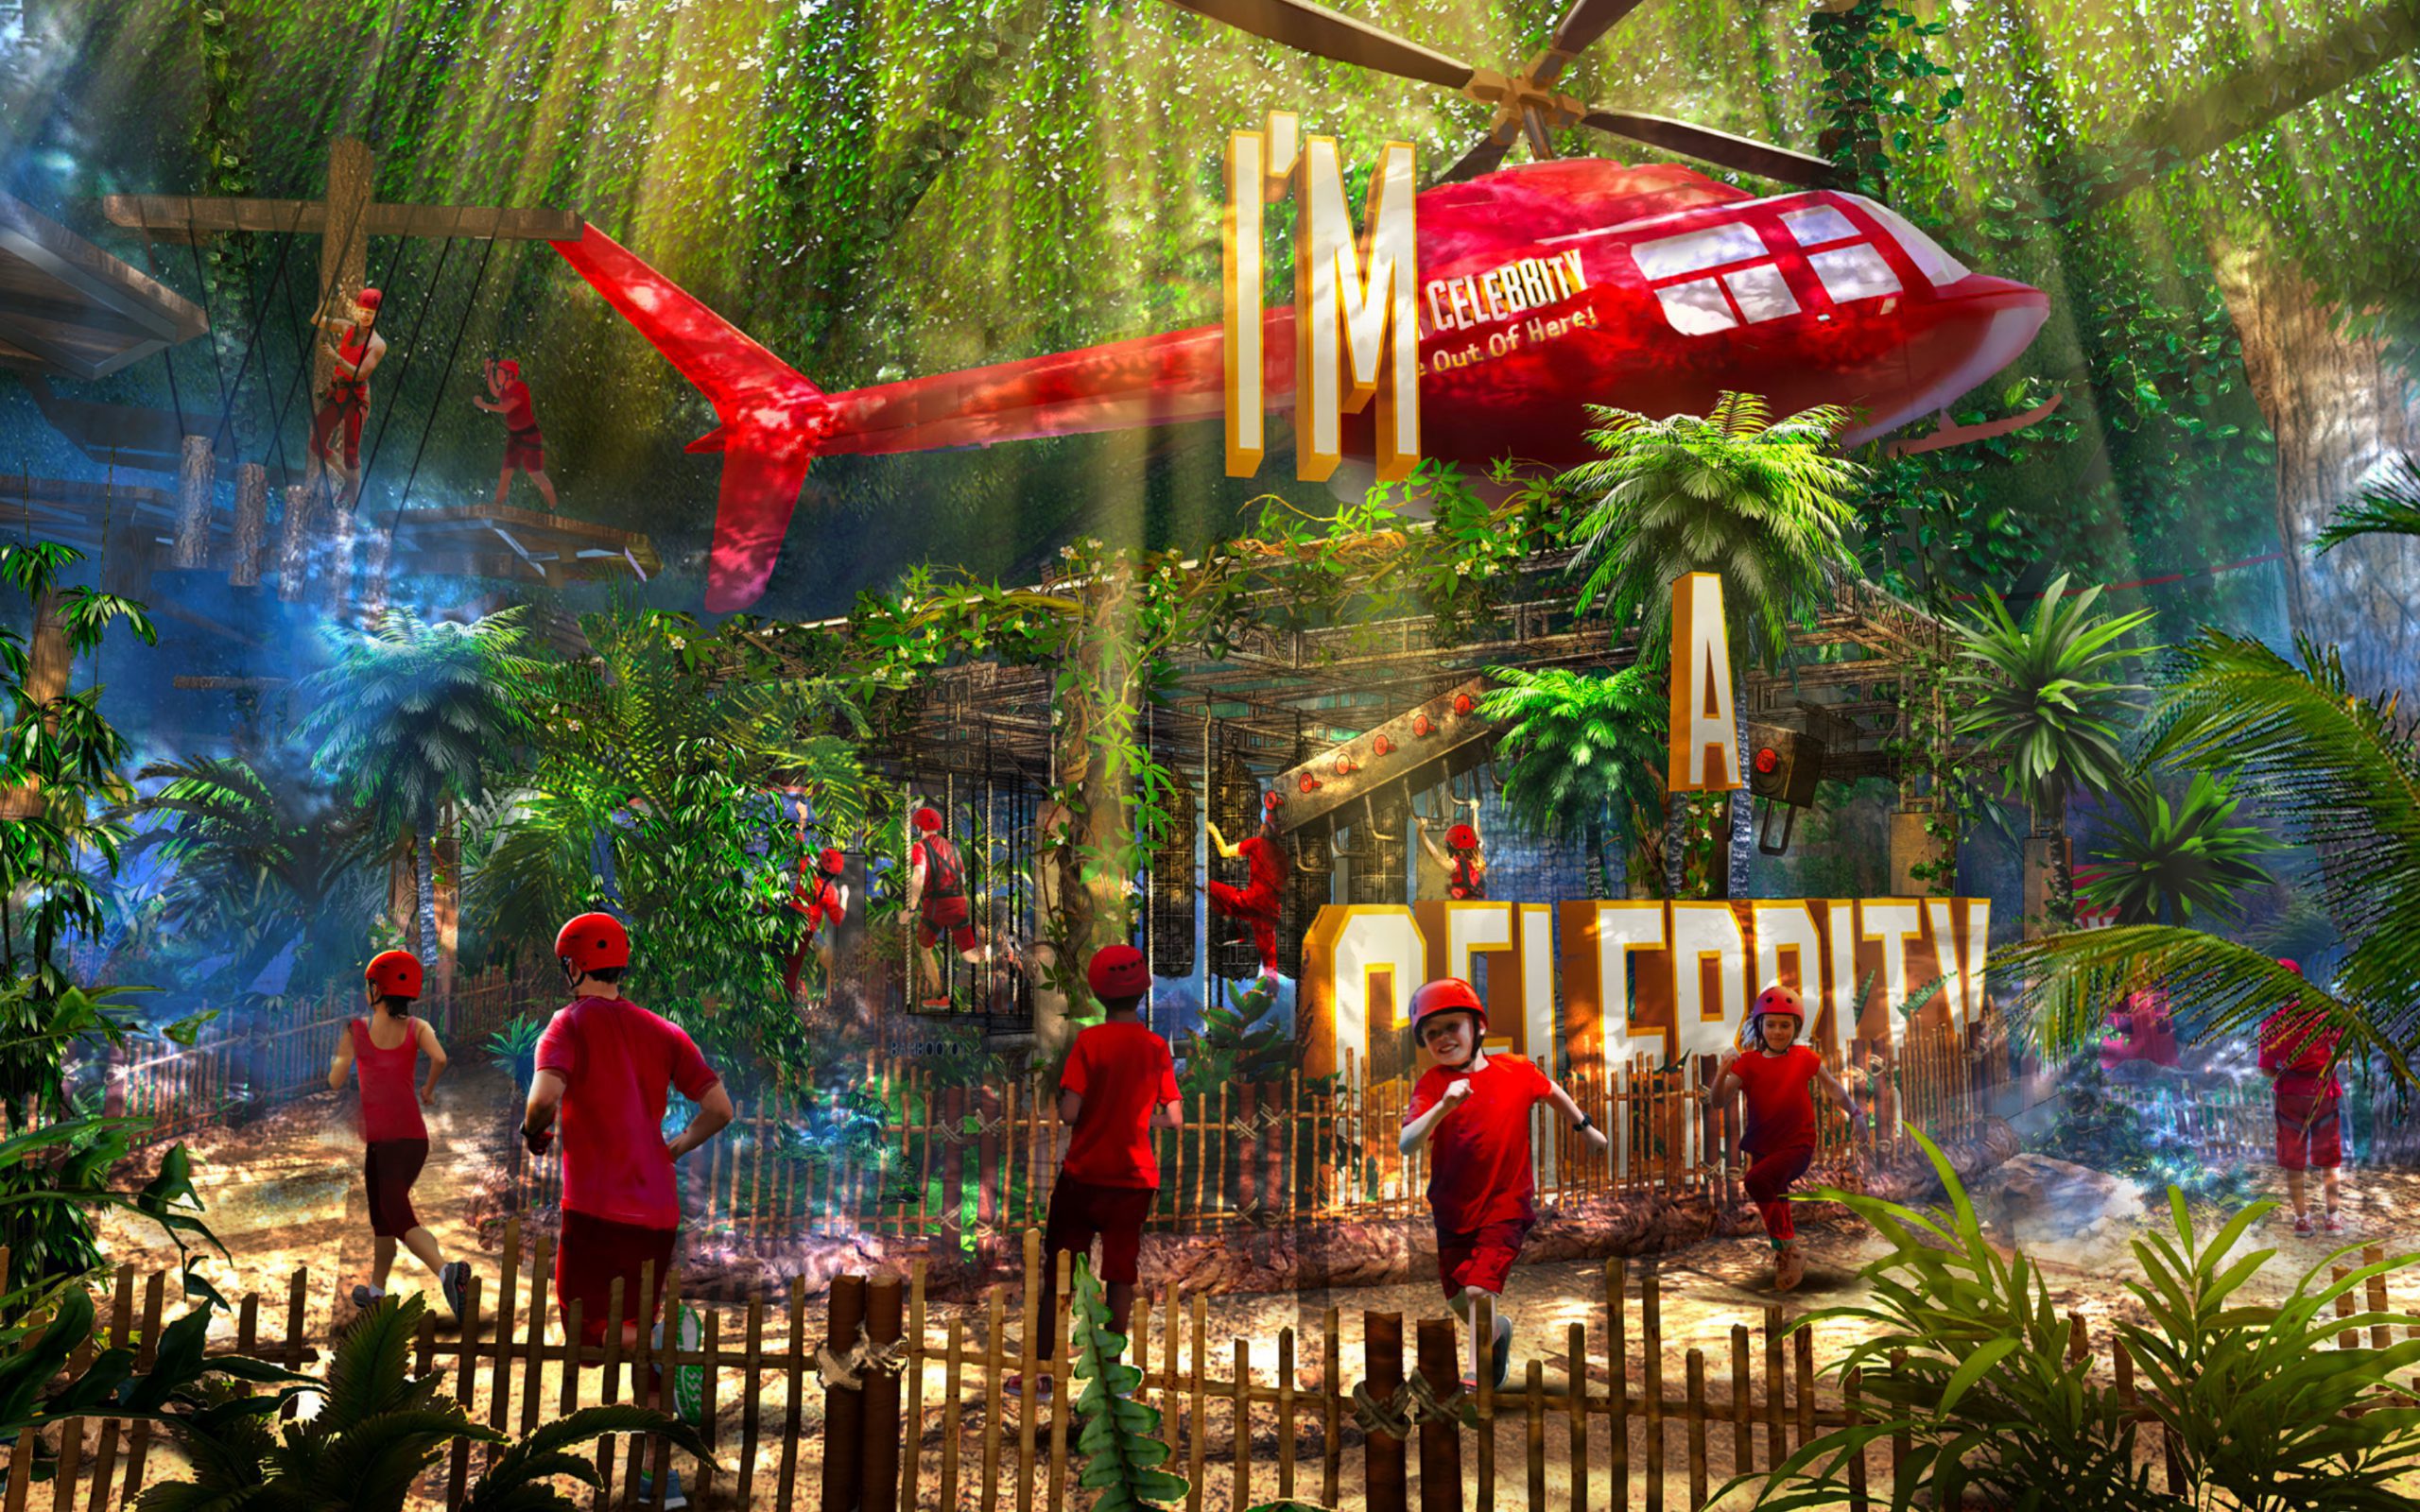 A concept image of inside an I'm a Celebrity themed attraction that is jungle themed